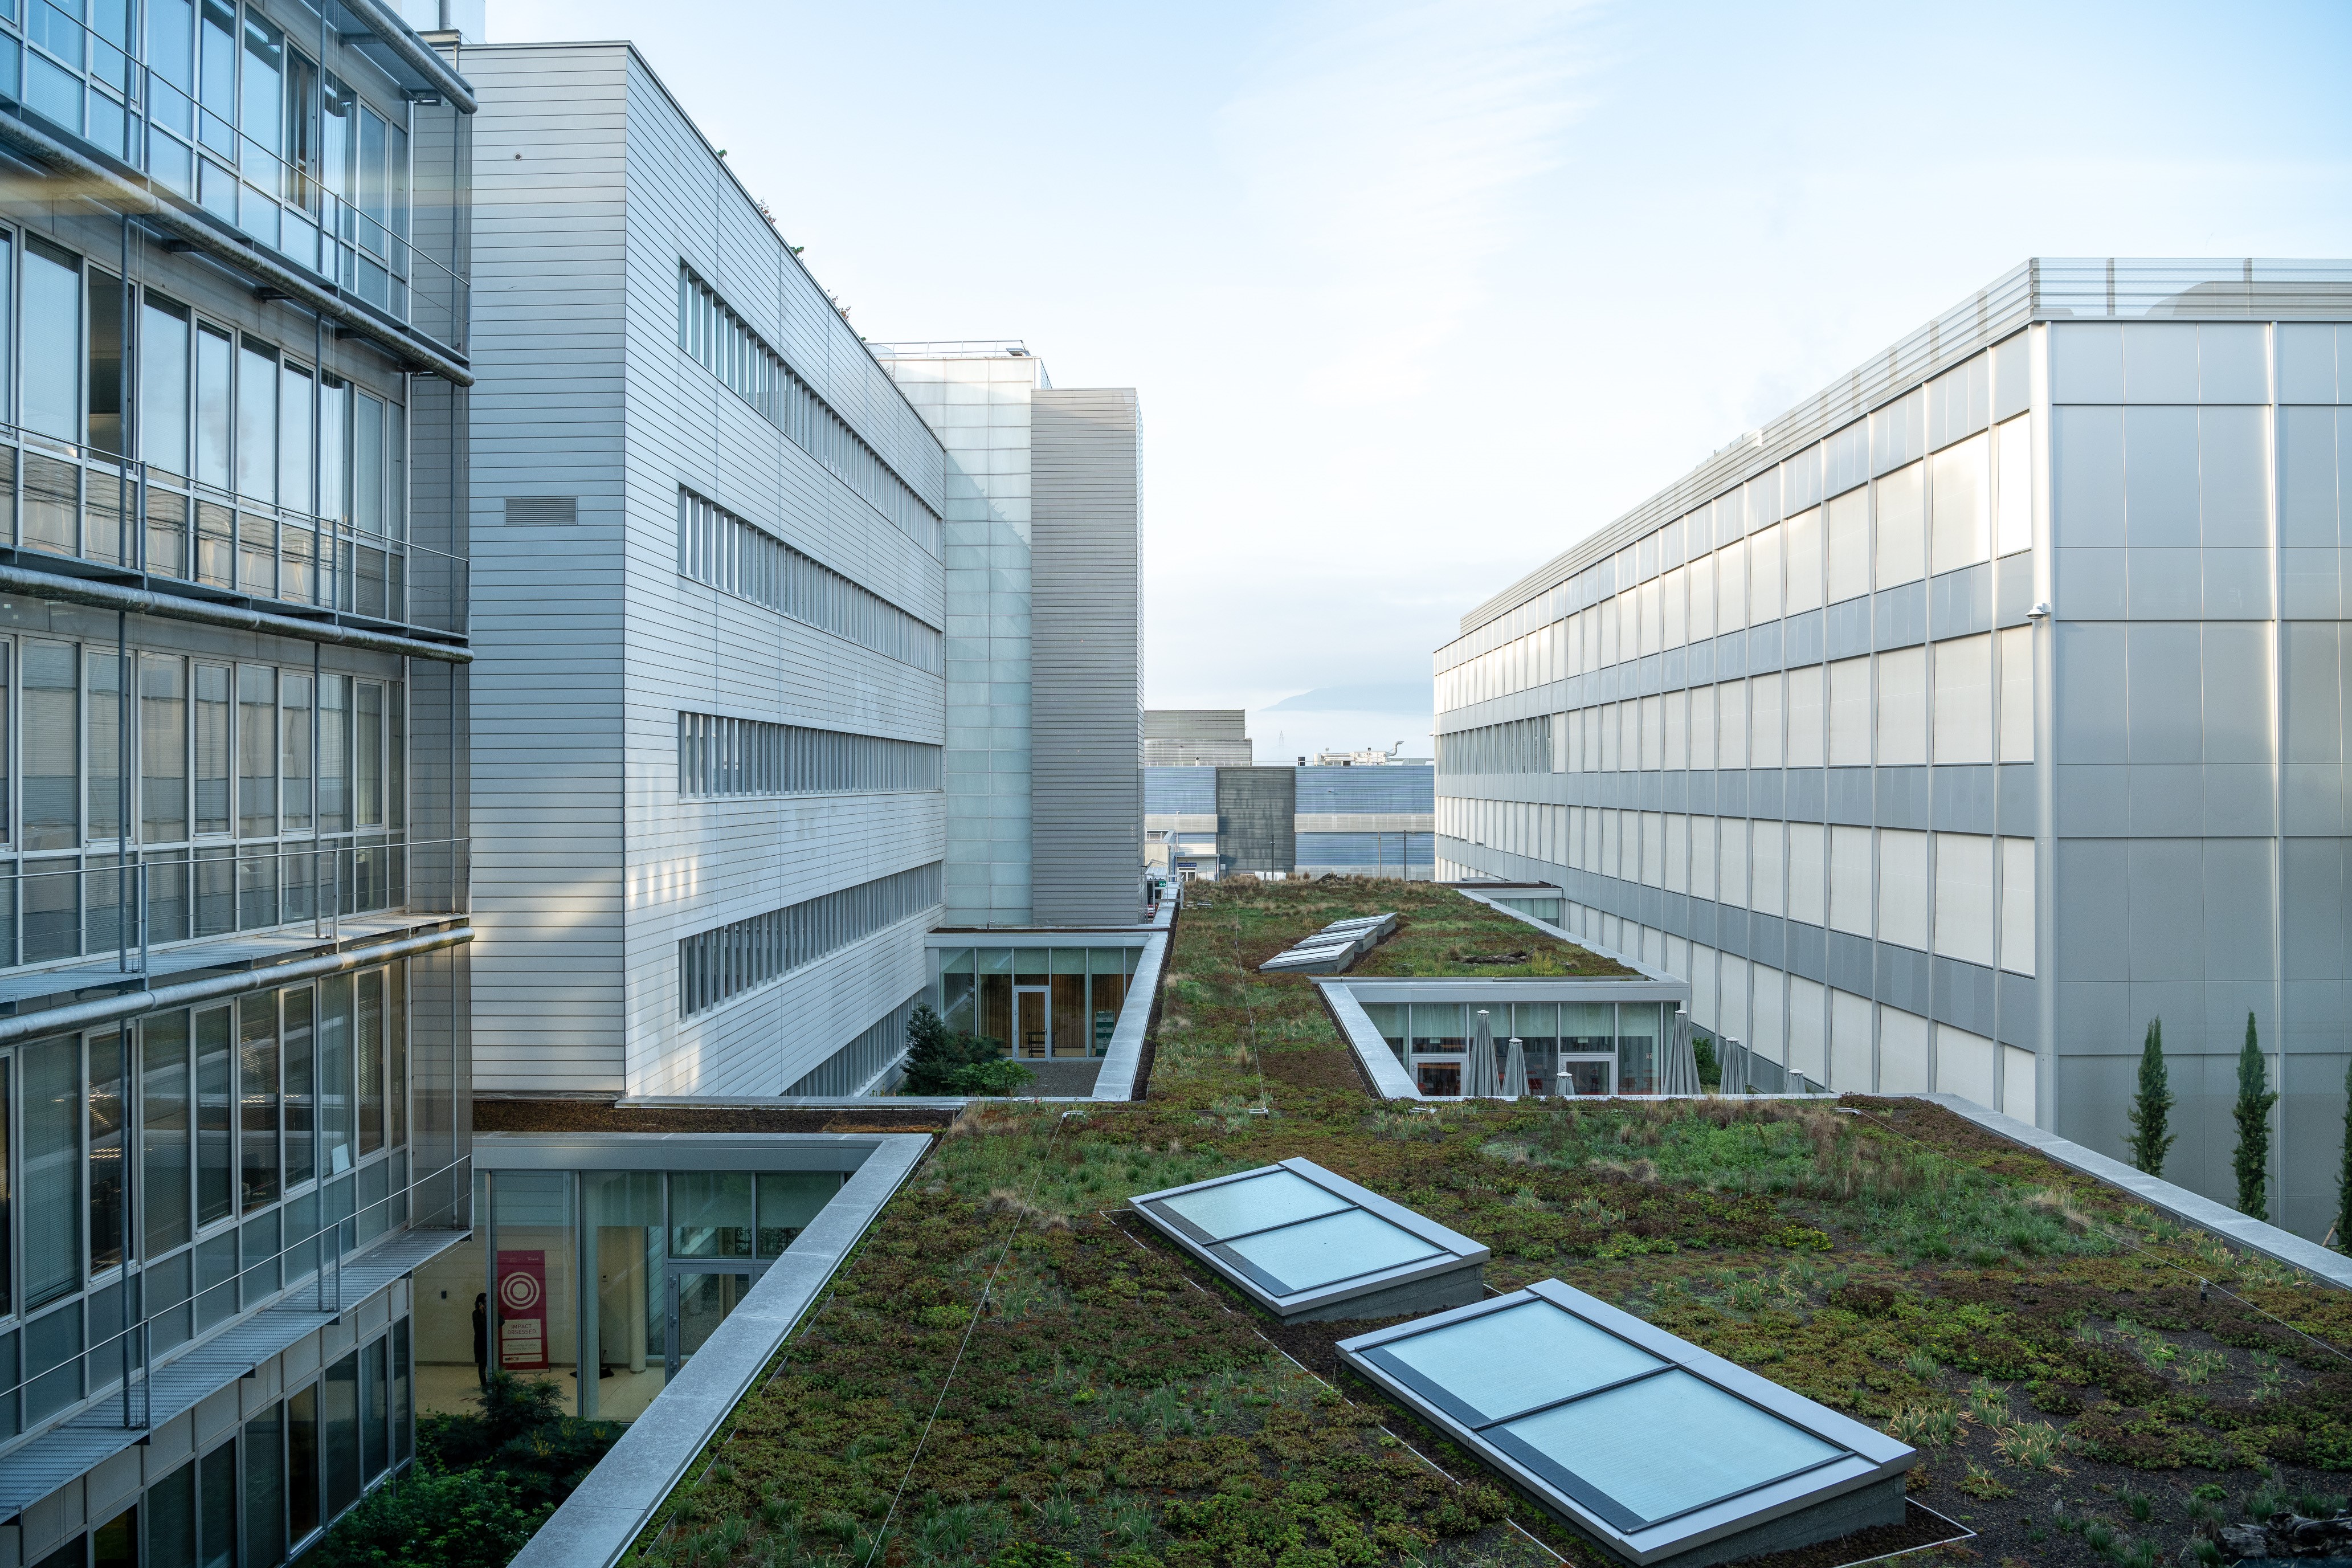 The Competition Commission of India is the final competition clearance pending (image: Firmenich's Geneva campus)